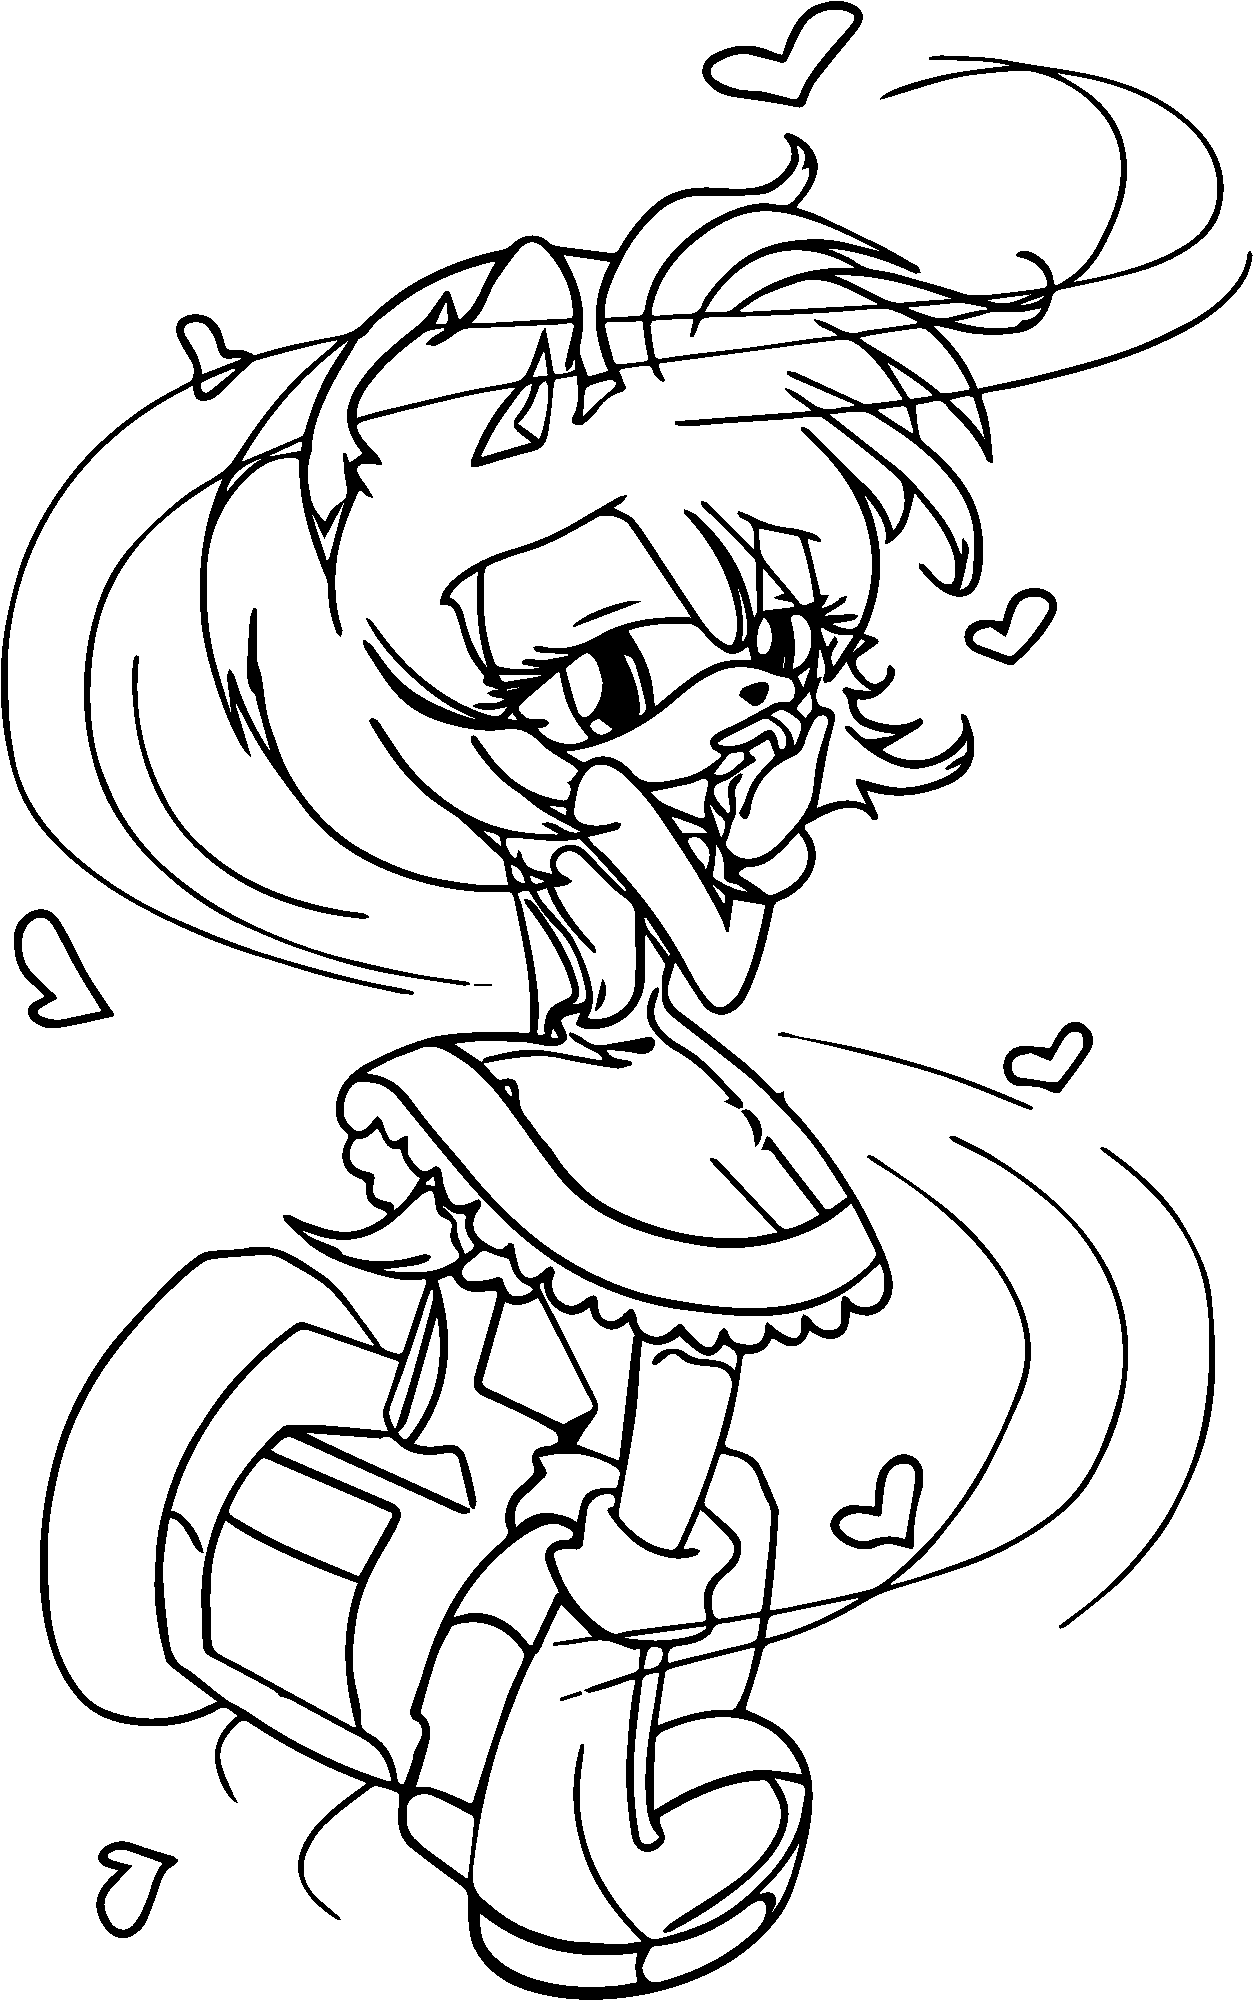 amy rose coloring pages amy rose coloring pages to download and print for free coloring pages rose amy 